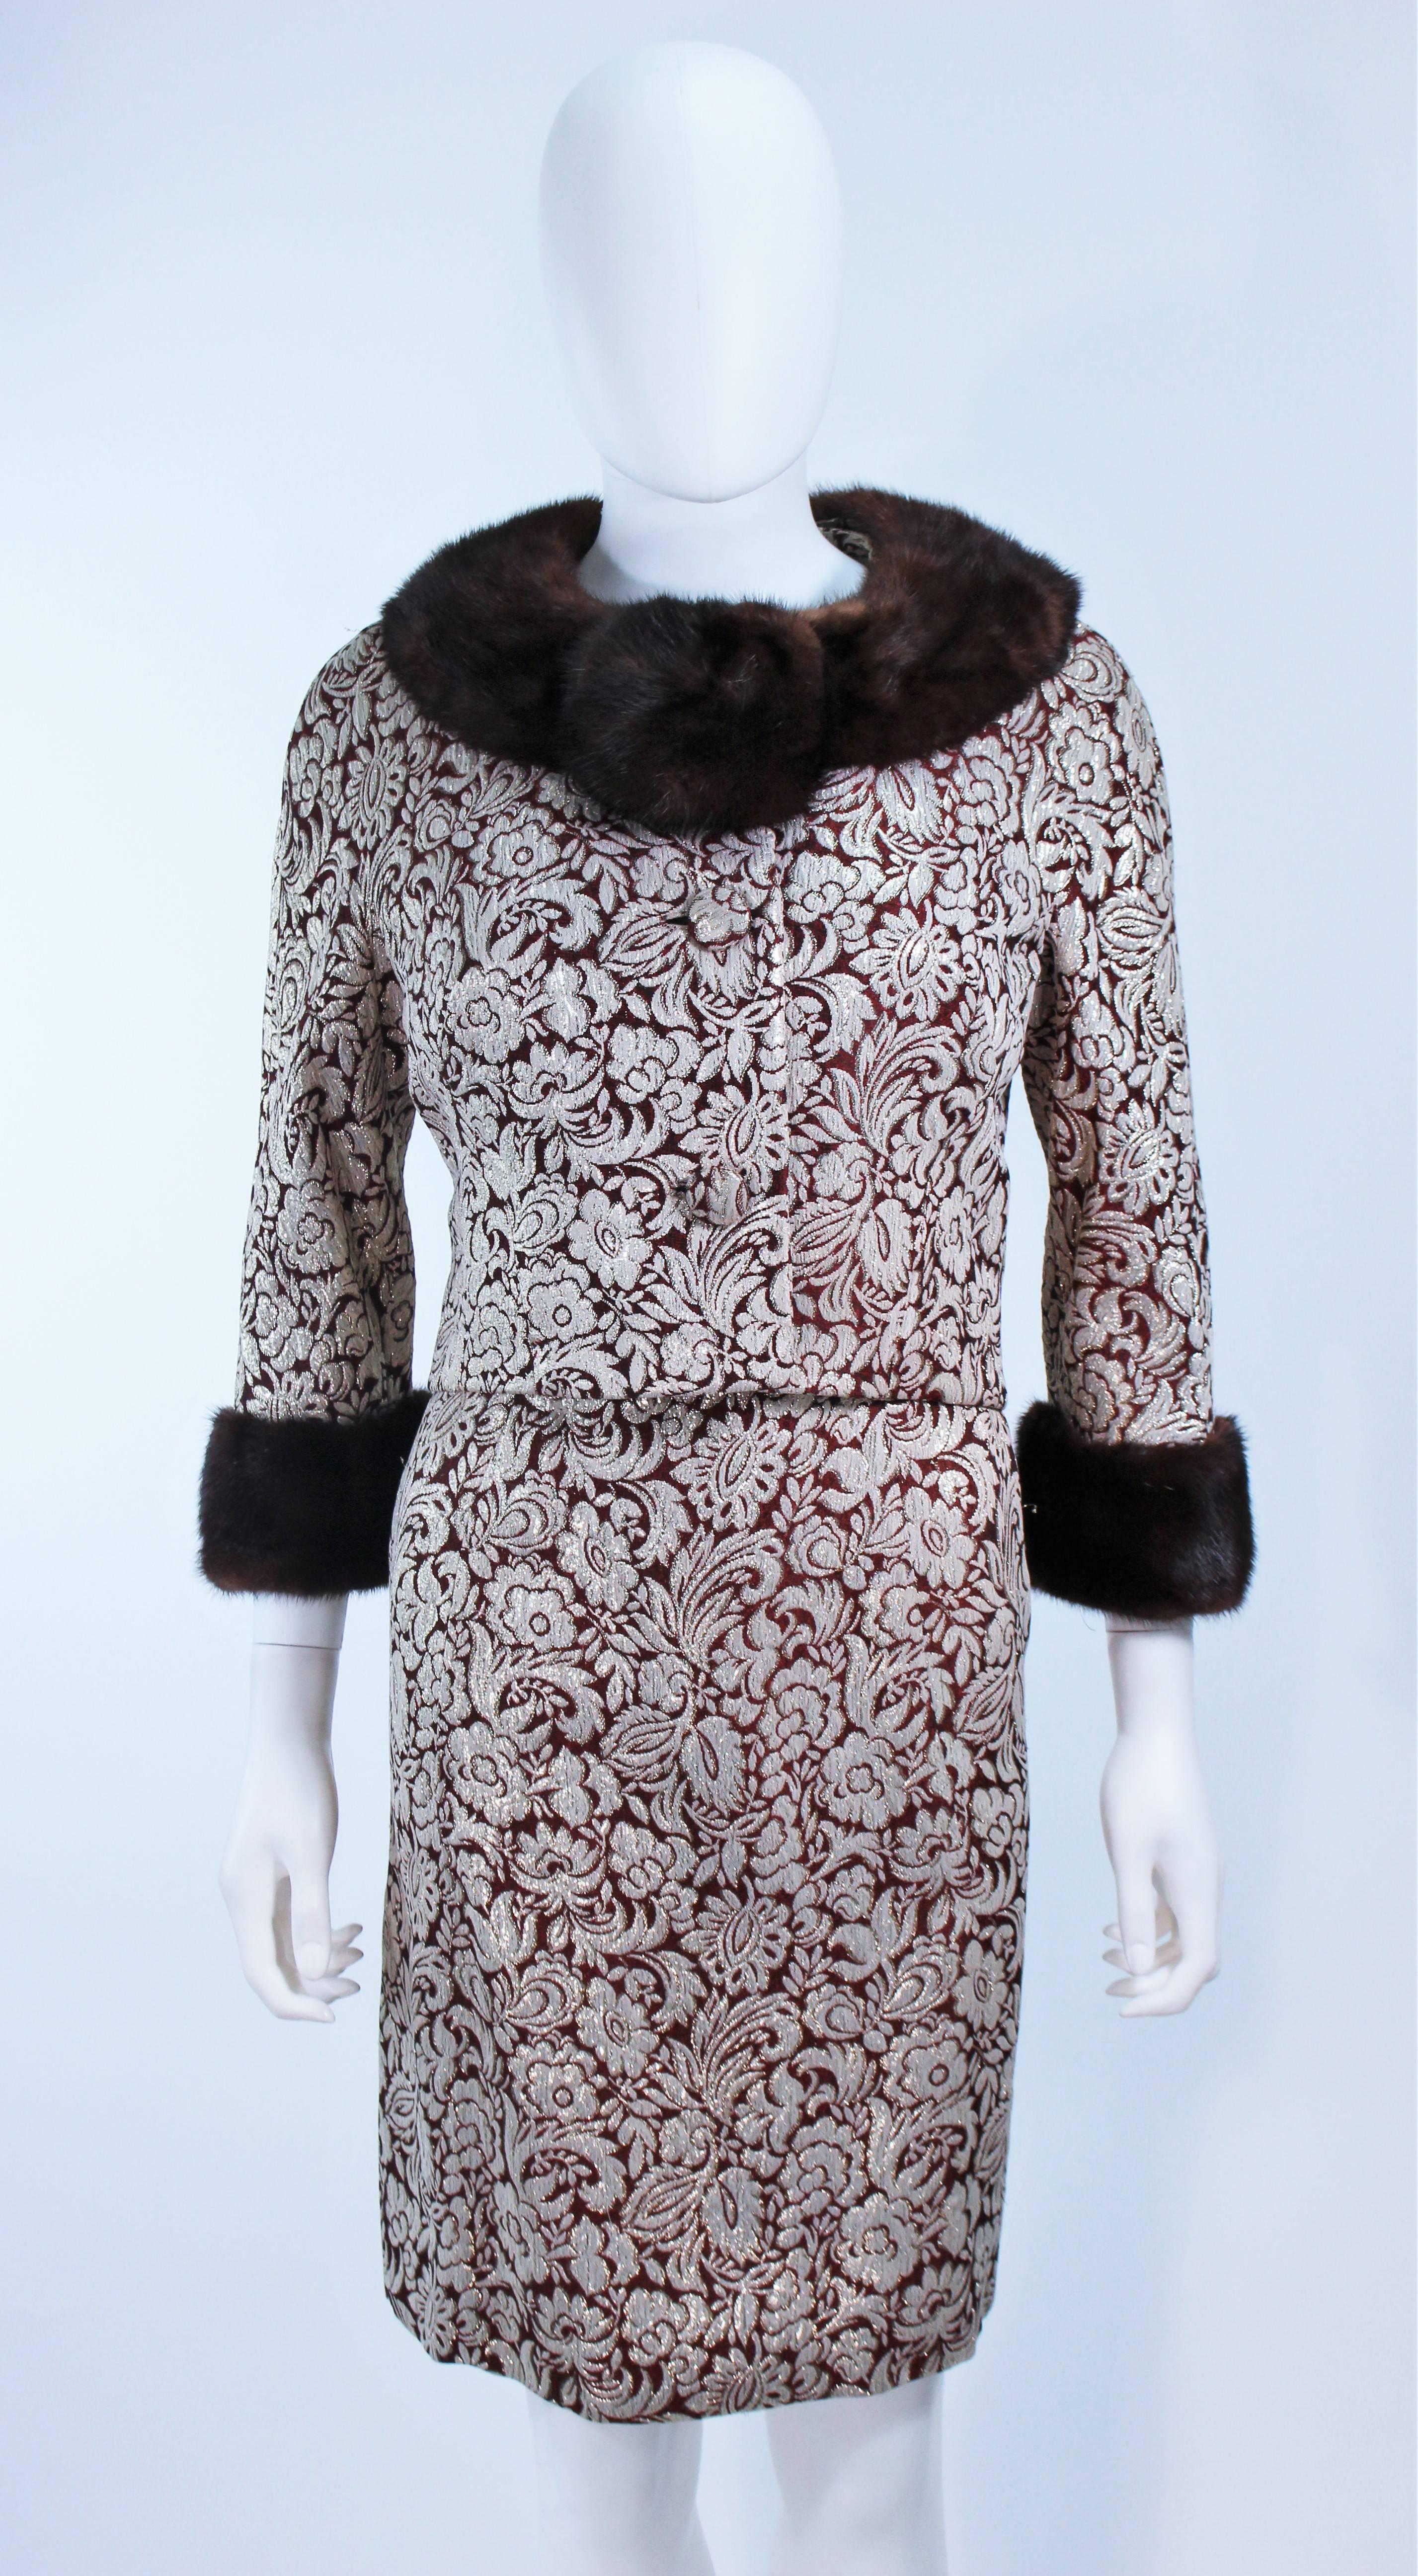  This ensemble is composed of a burgundy and metallic floral brocade with mink trim. The jacket has center front closures, and the dress has a center back zipper closure. In great vintage condition.

  **Please cross-reference measurements for